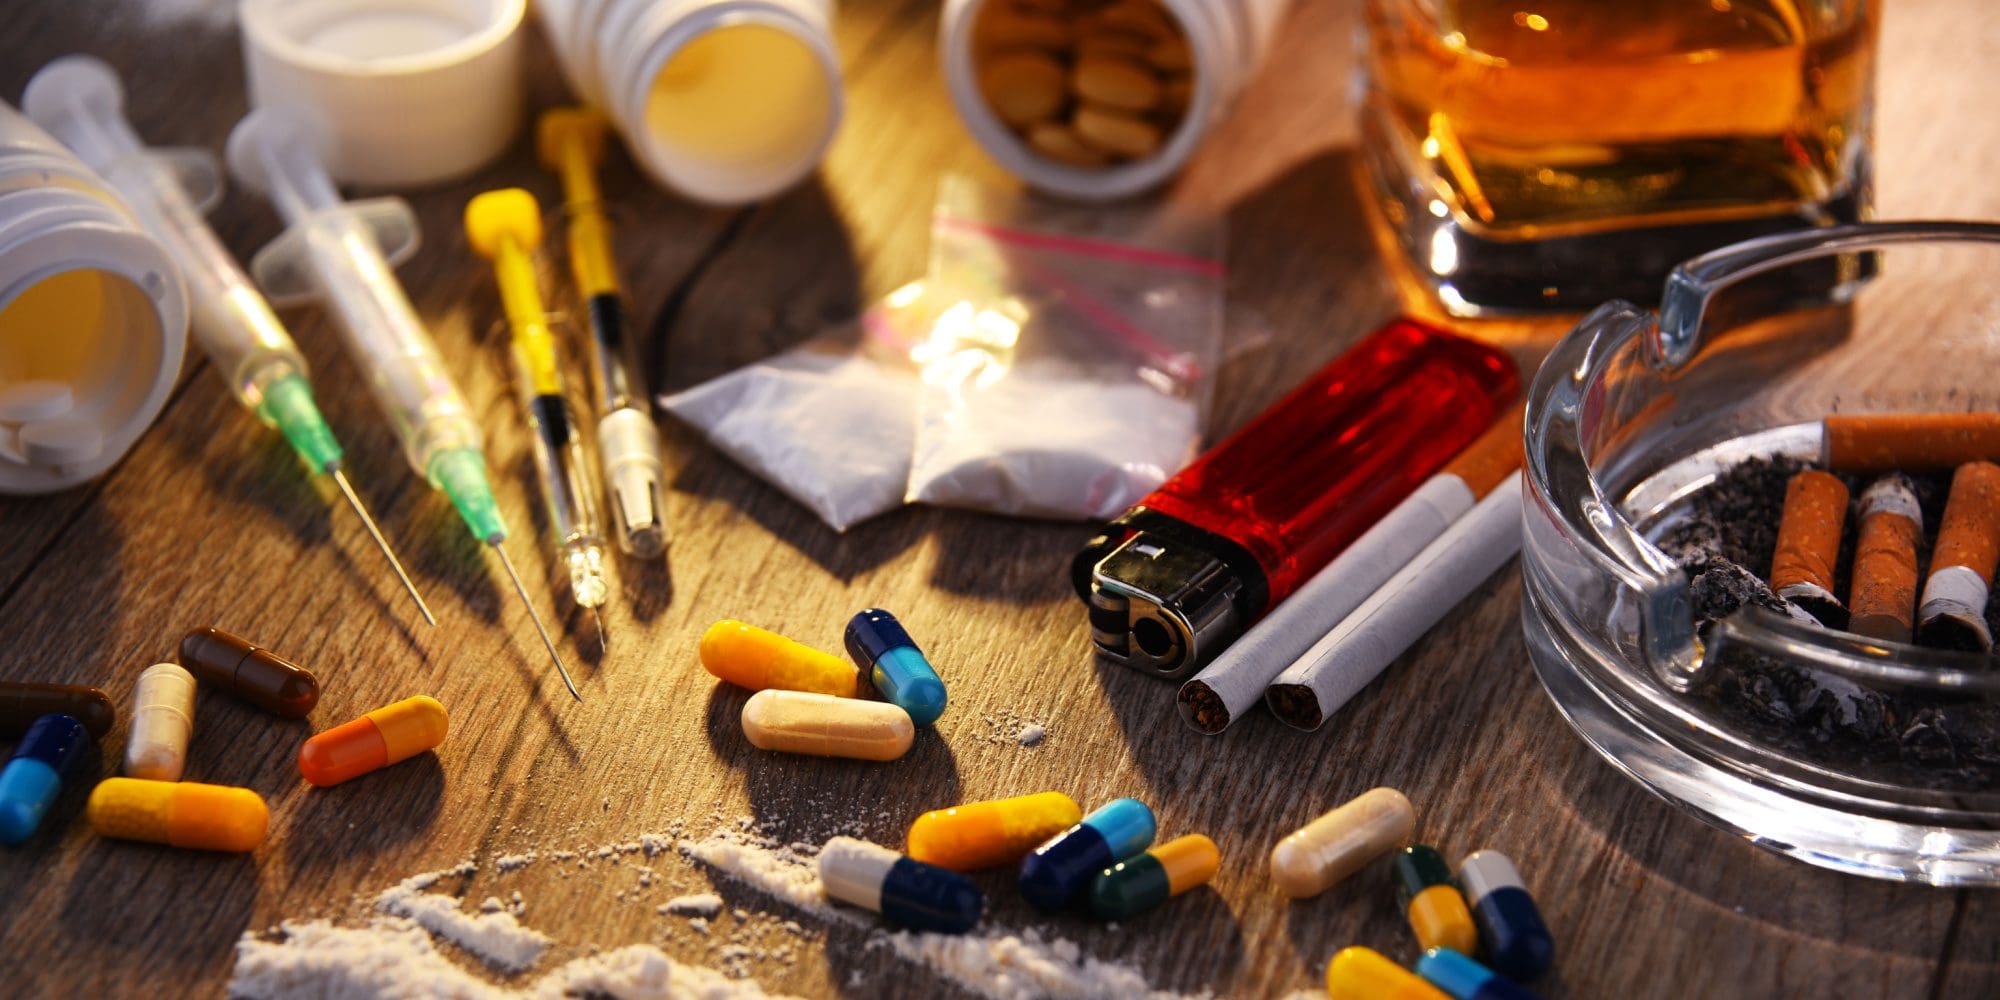 Most Addictive Drugs: What Are They?